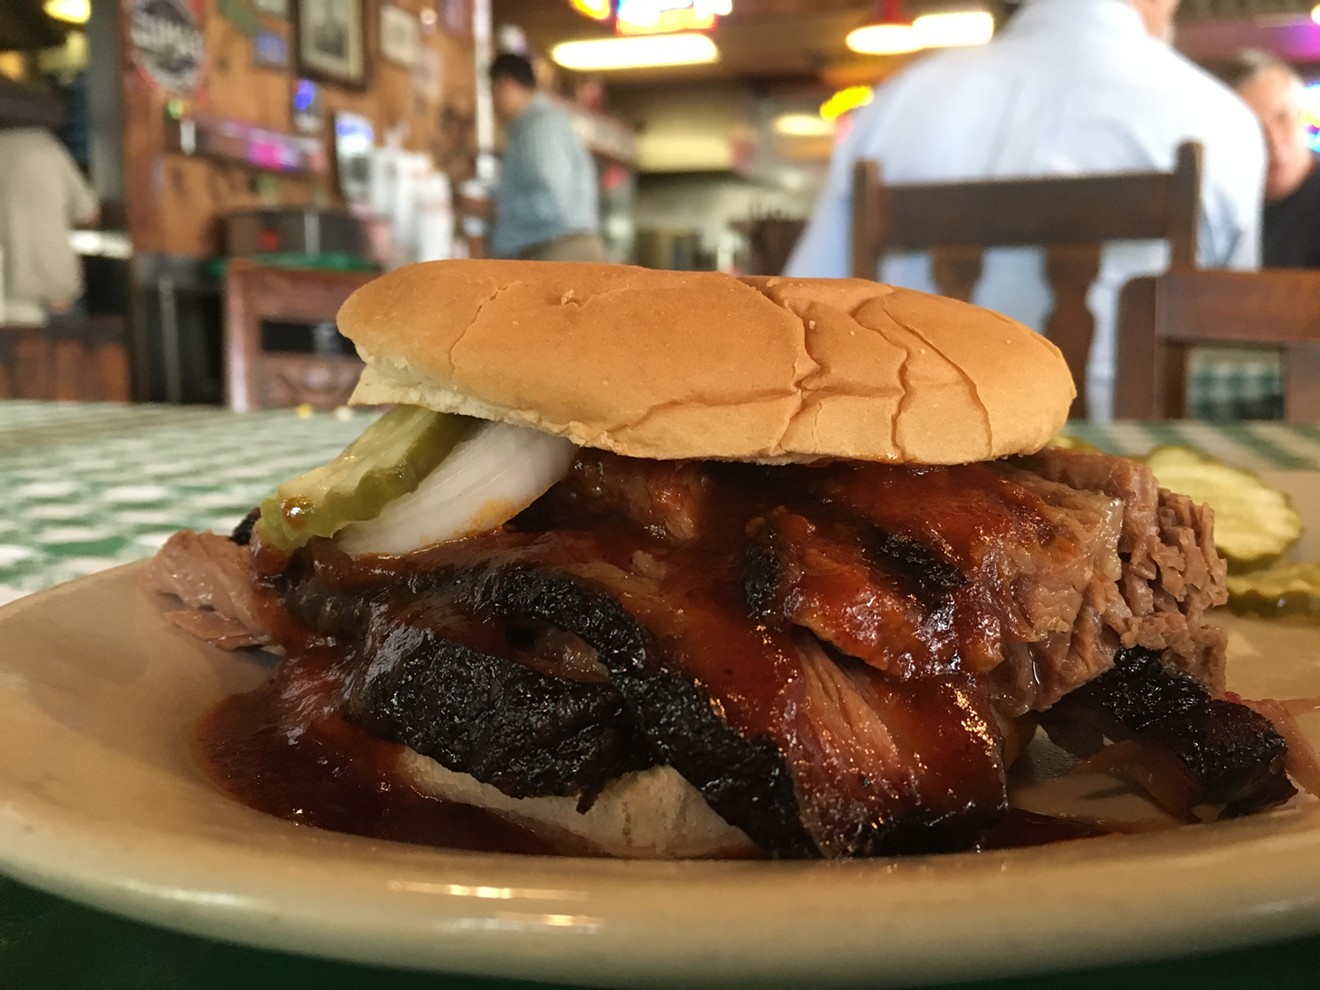 A sliced brisket sandwich at Sammy's is better than it's ever been at the 26-year-old joint.